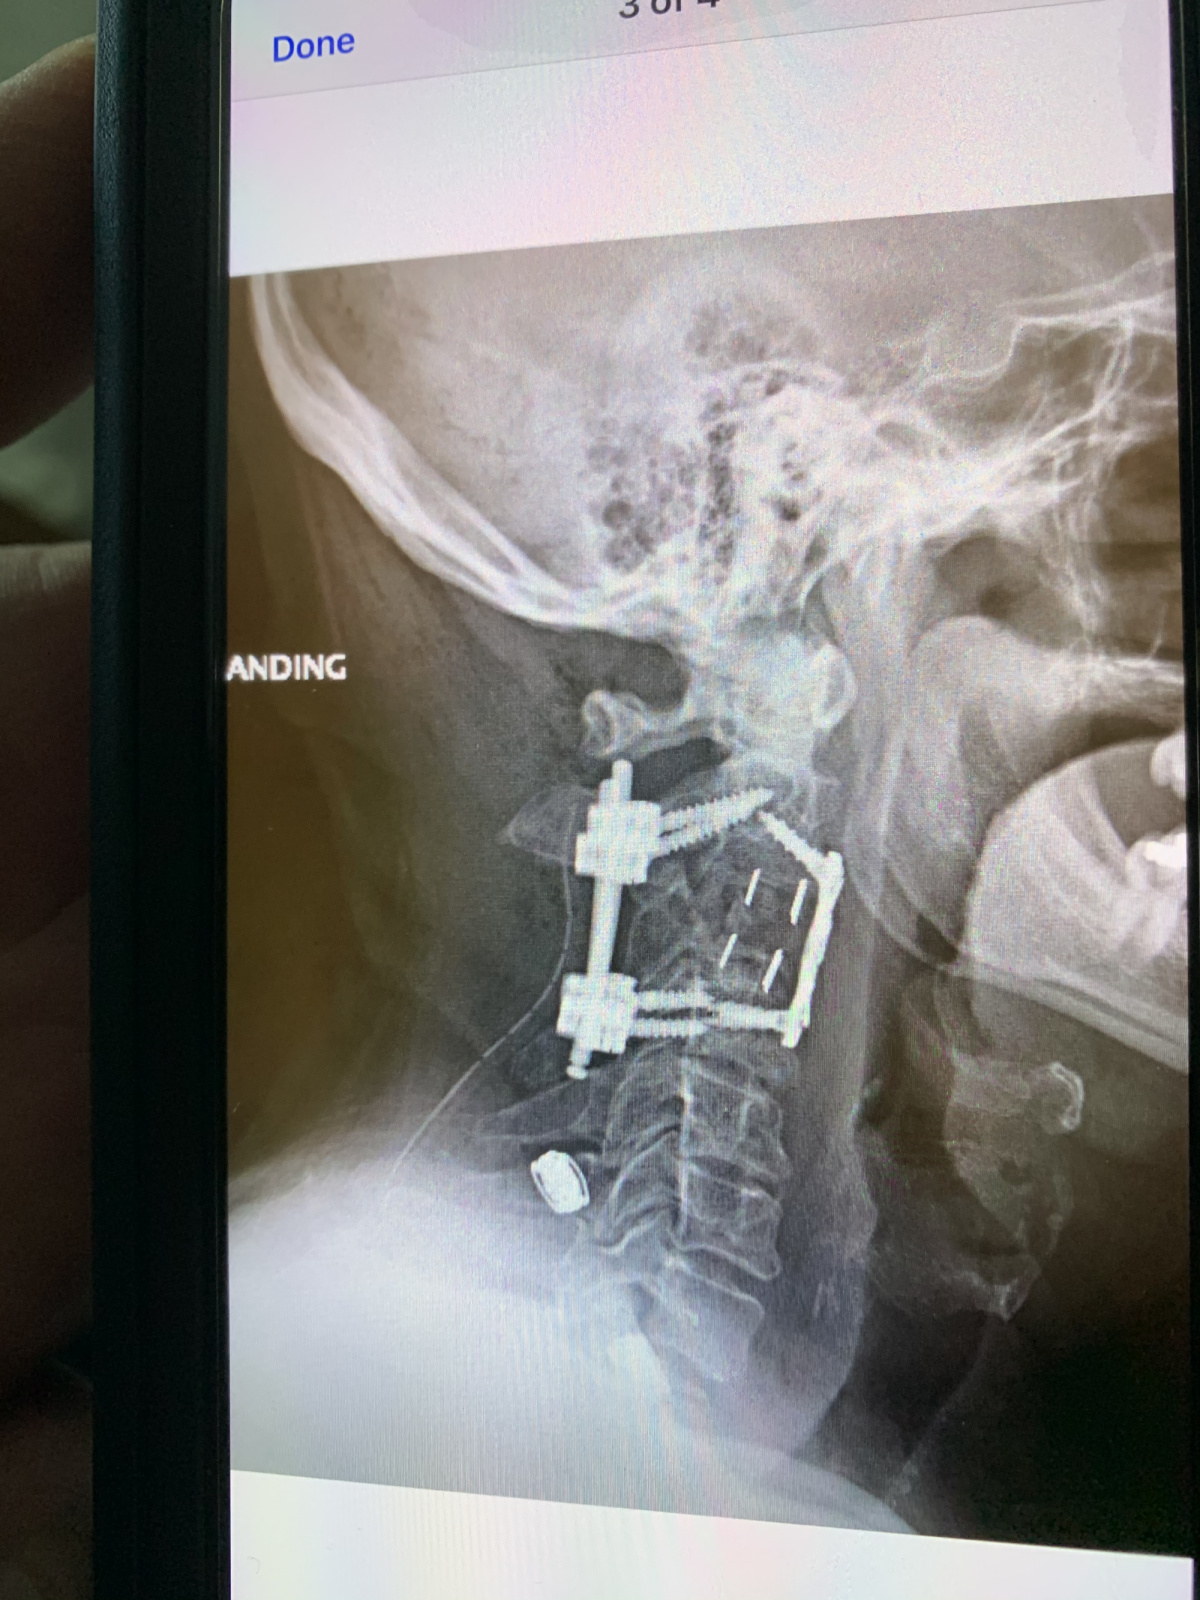 In the back, screws are attached to C2 and C4 vertebrae. In front is a plate that secures the replacement vertebra or cage. The four straight lines are markings that identify the plastic cage on diagnostic imaging. 